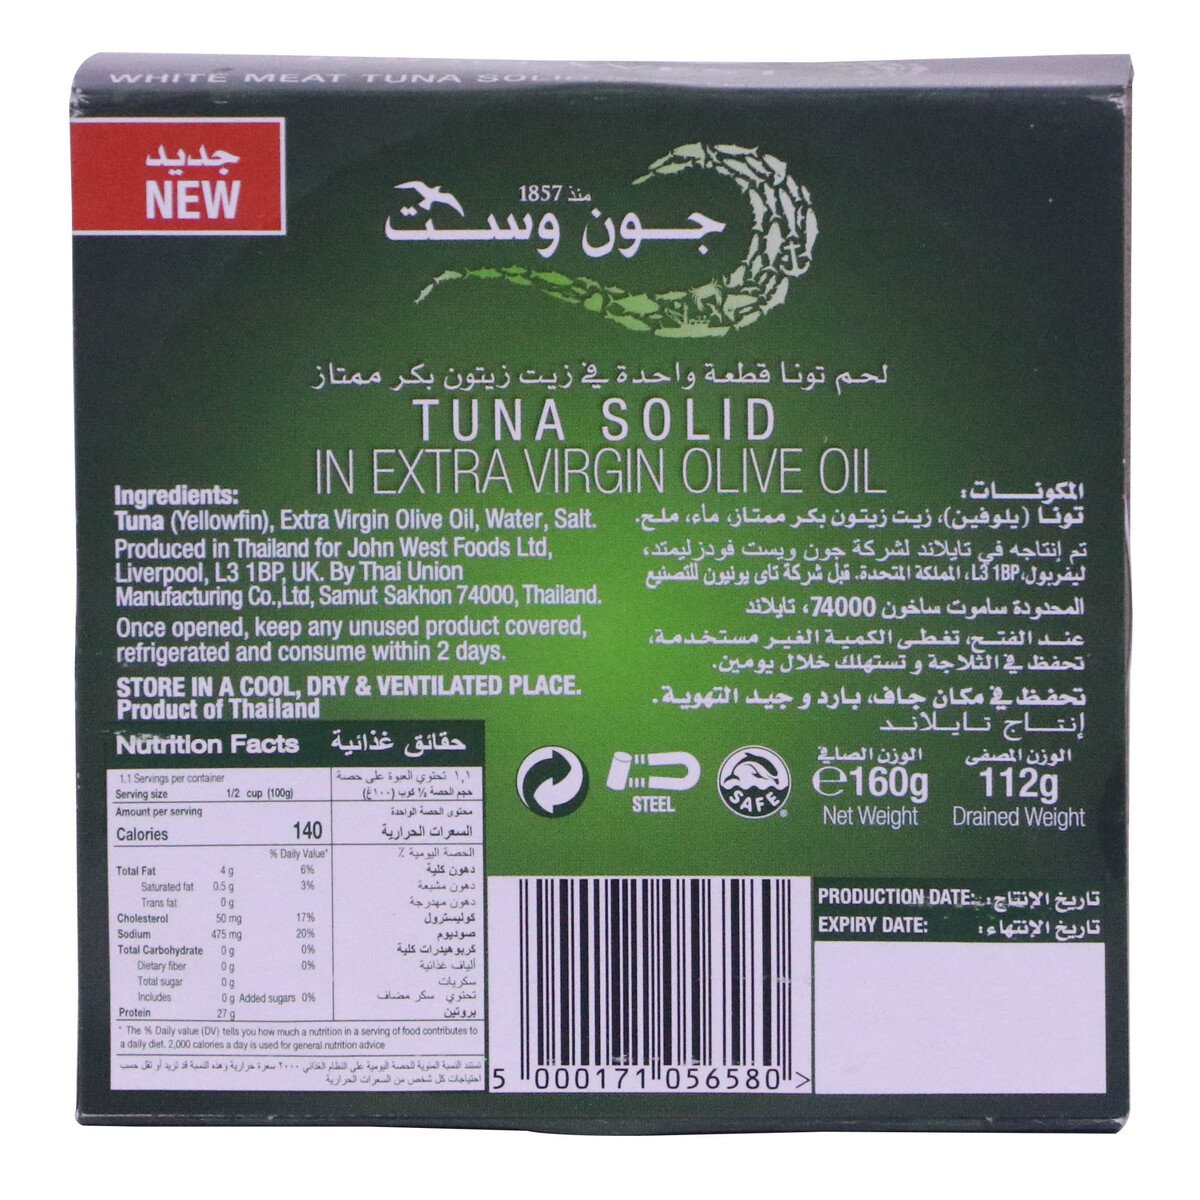 John West White Meat Tuna Solid in Extra Virgin Olive Oil 160g